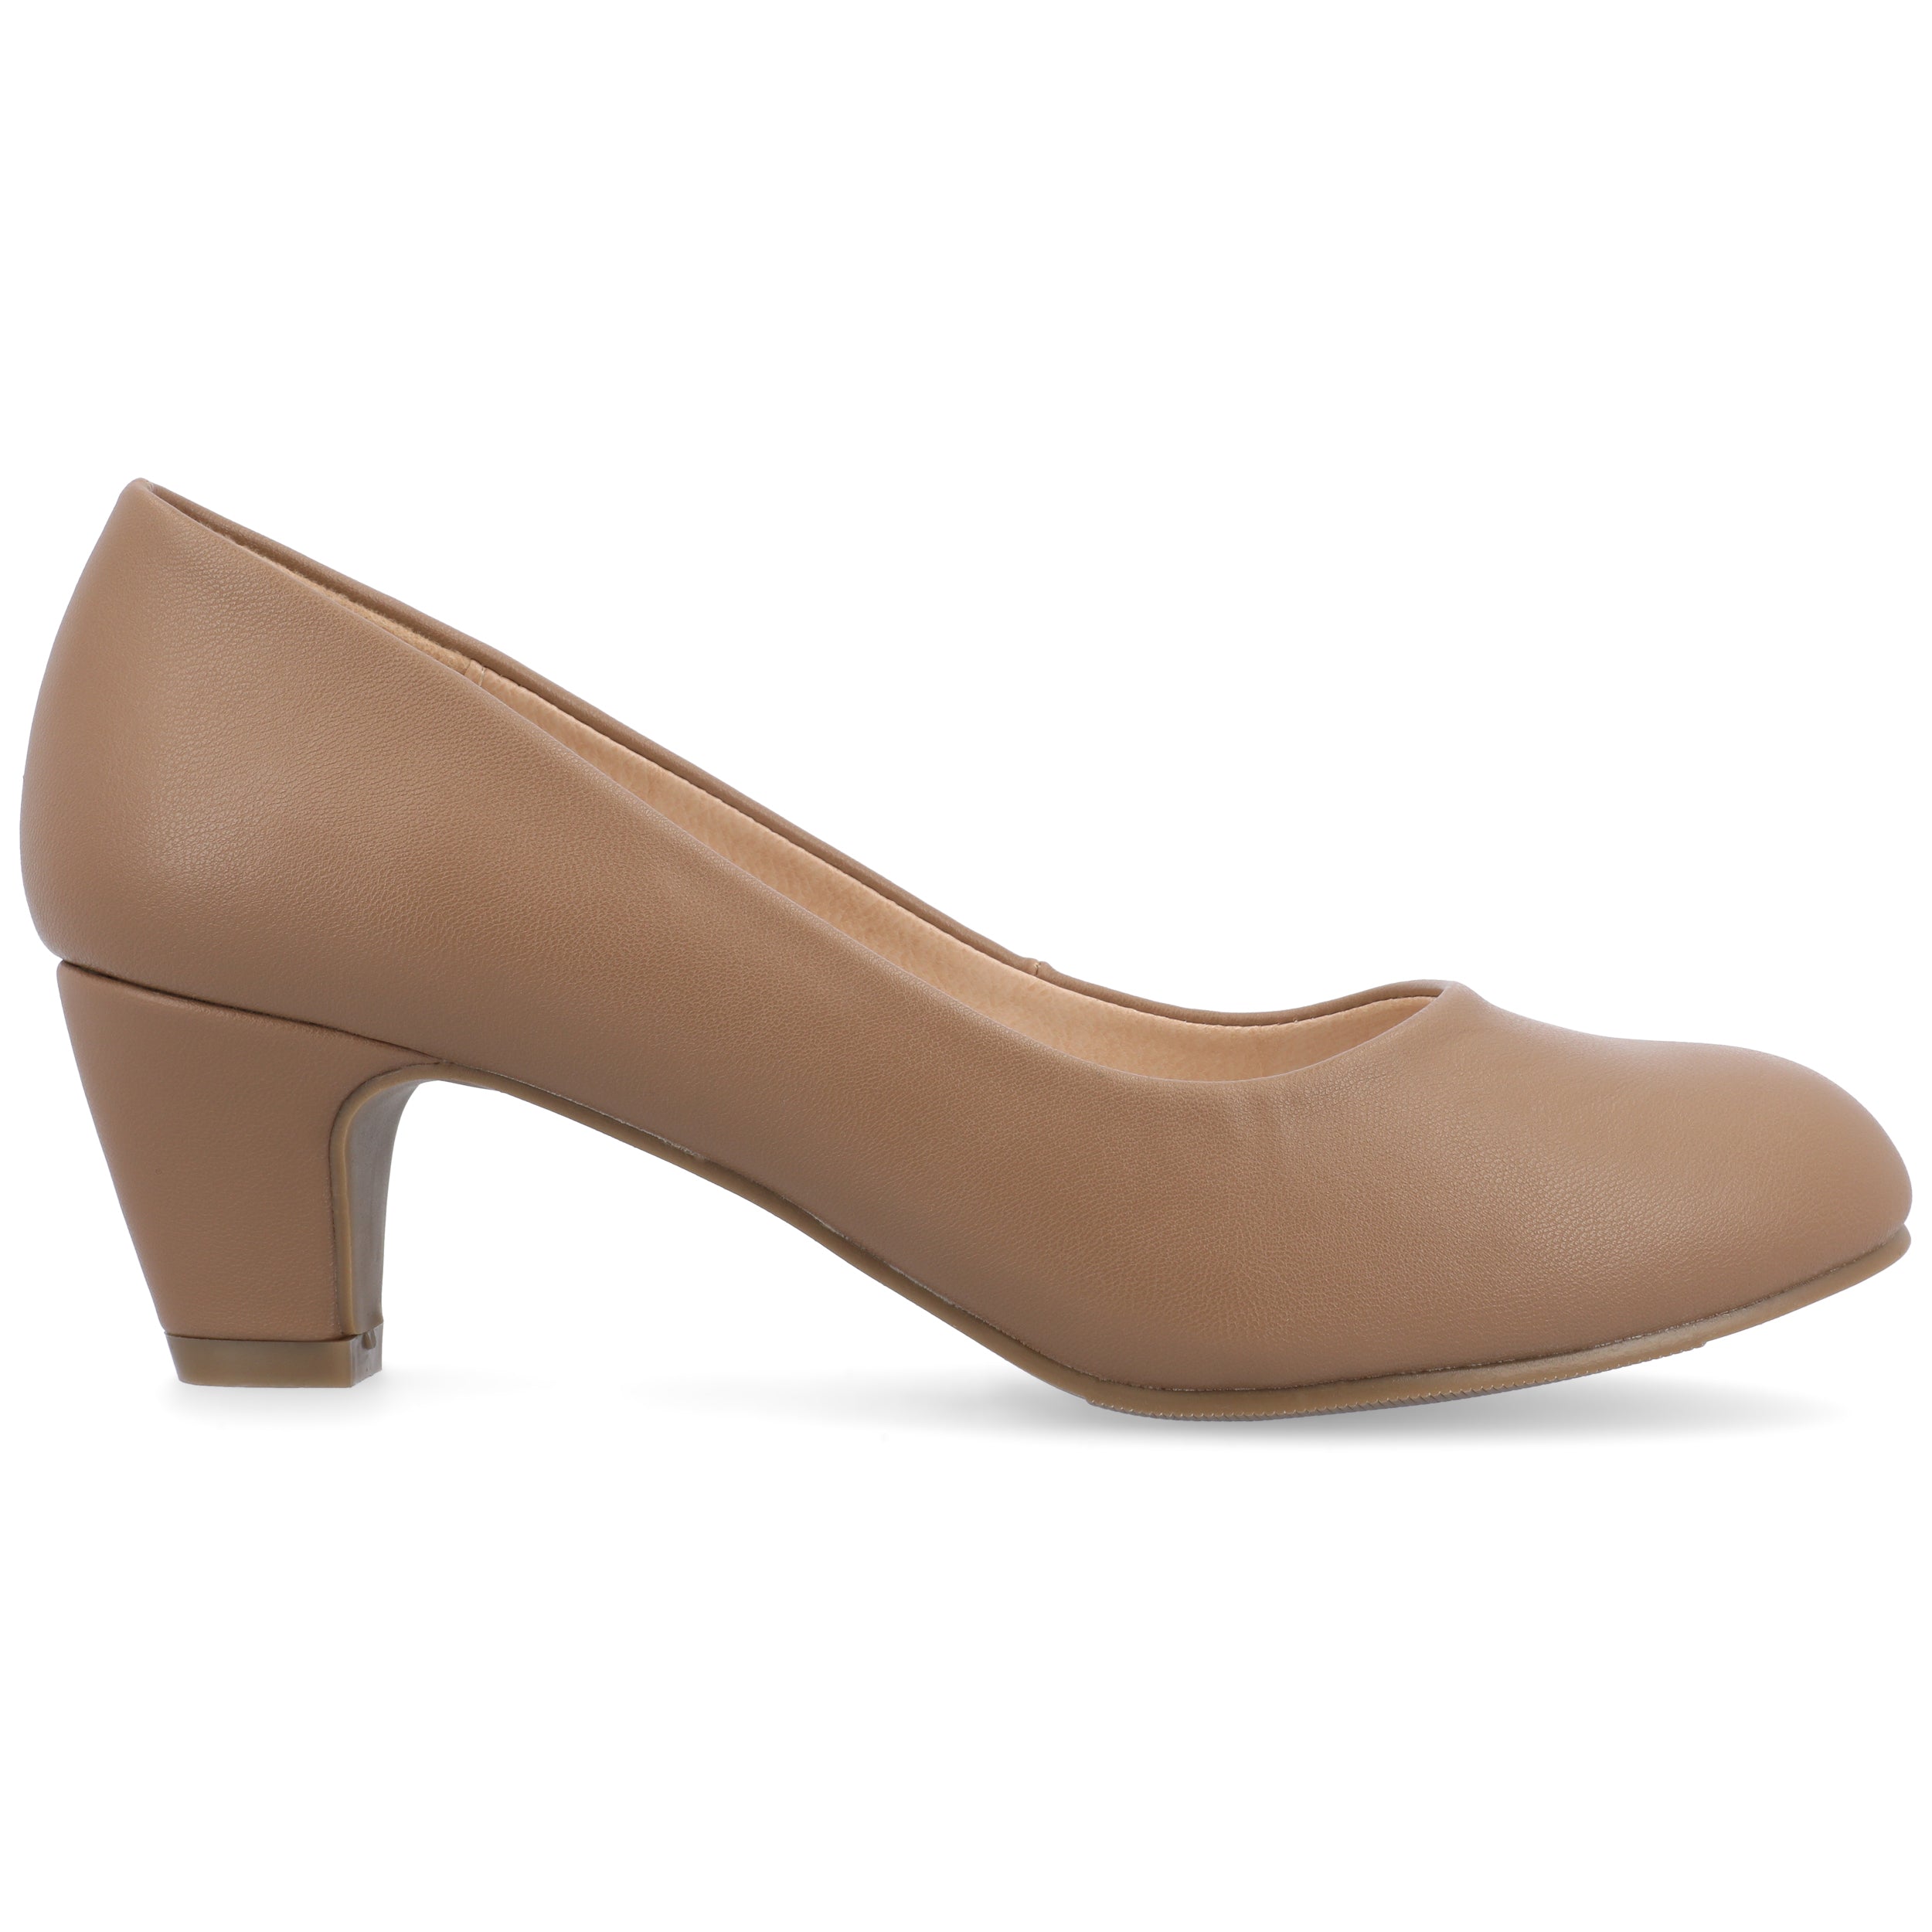 Classic Pumps - Comfortable Shoes - Ally Shoes